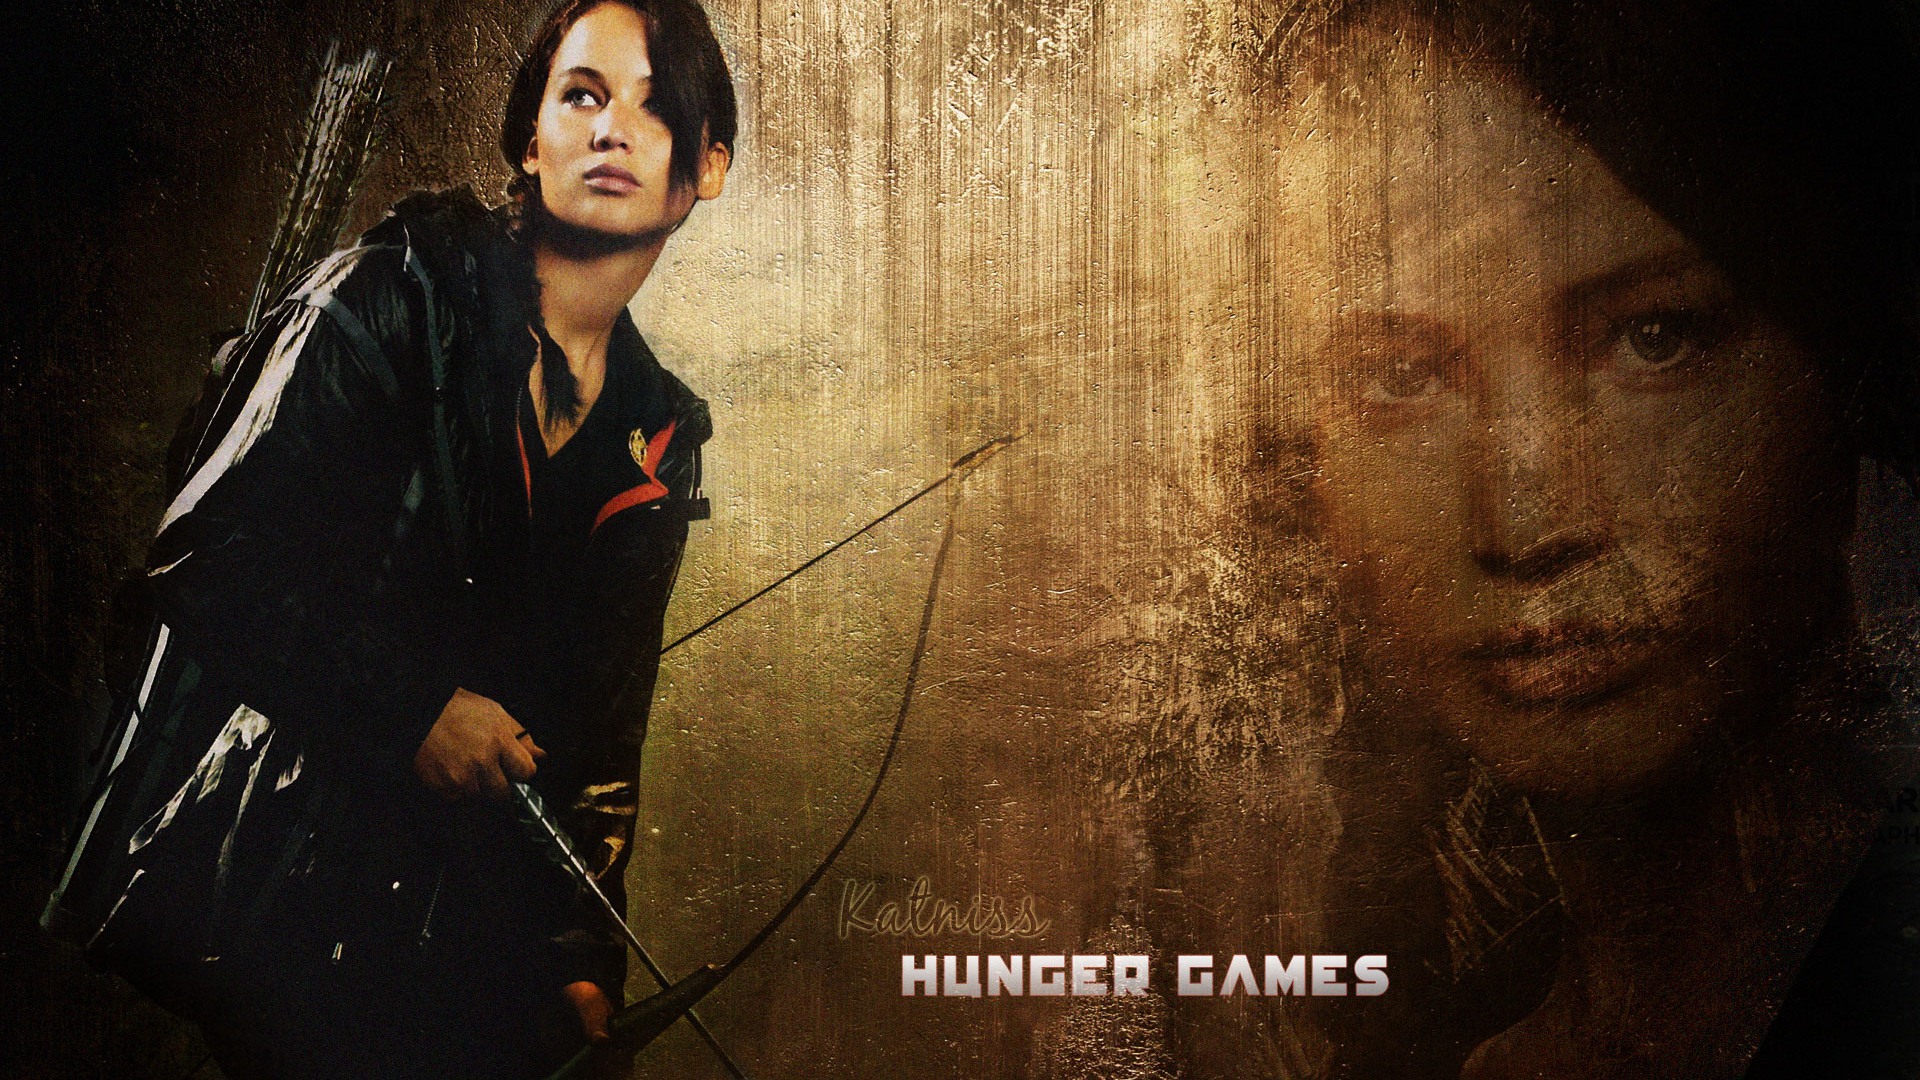 The Hunger Games HD wallpapers #8 - 1920x1080